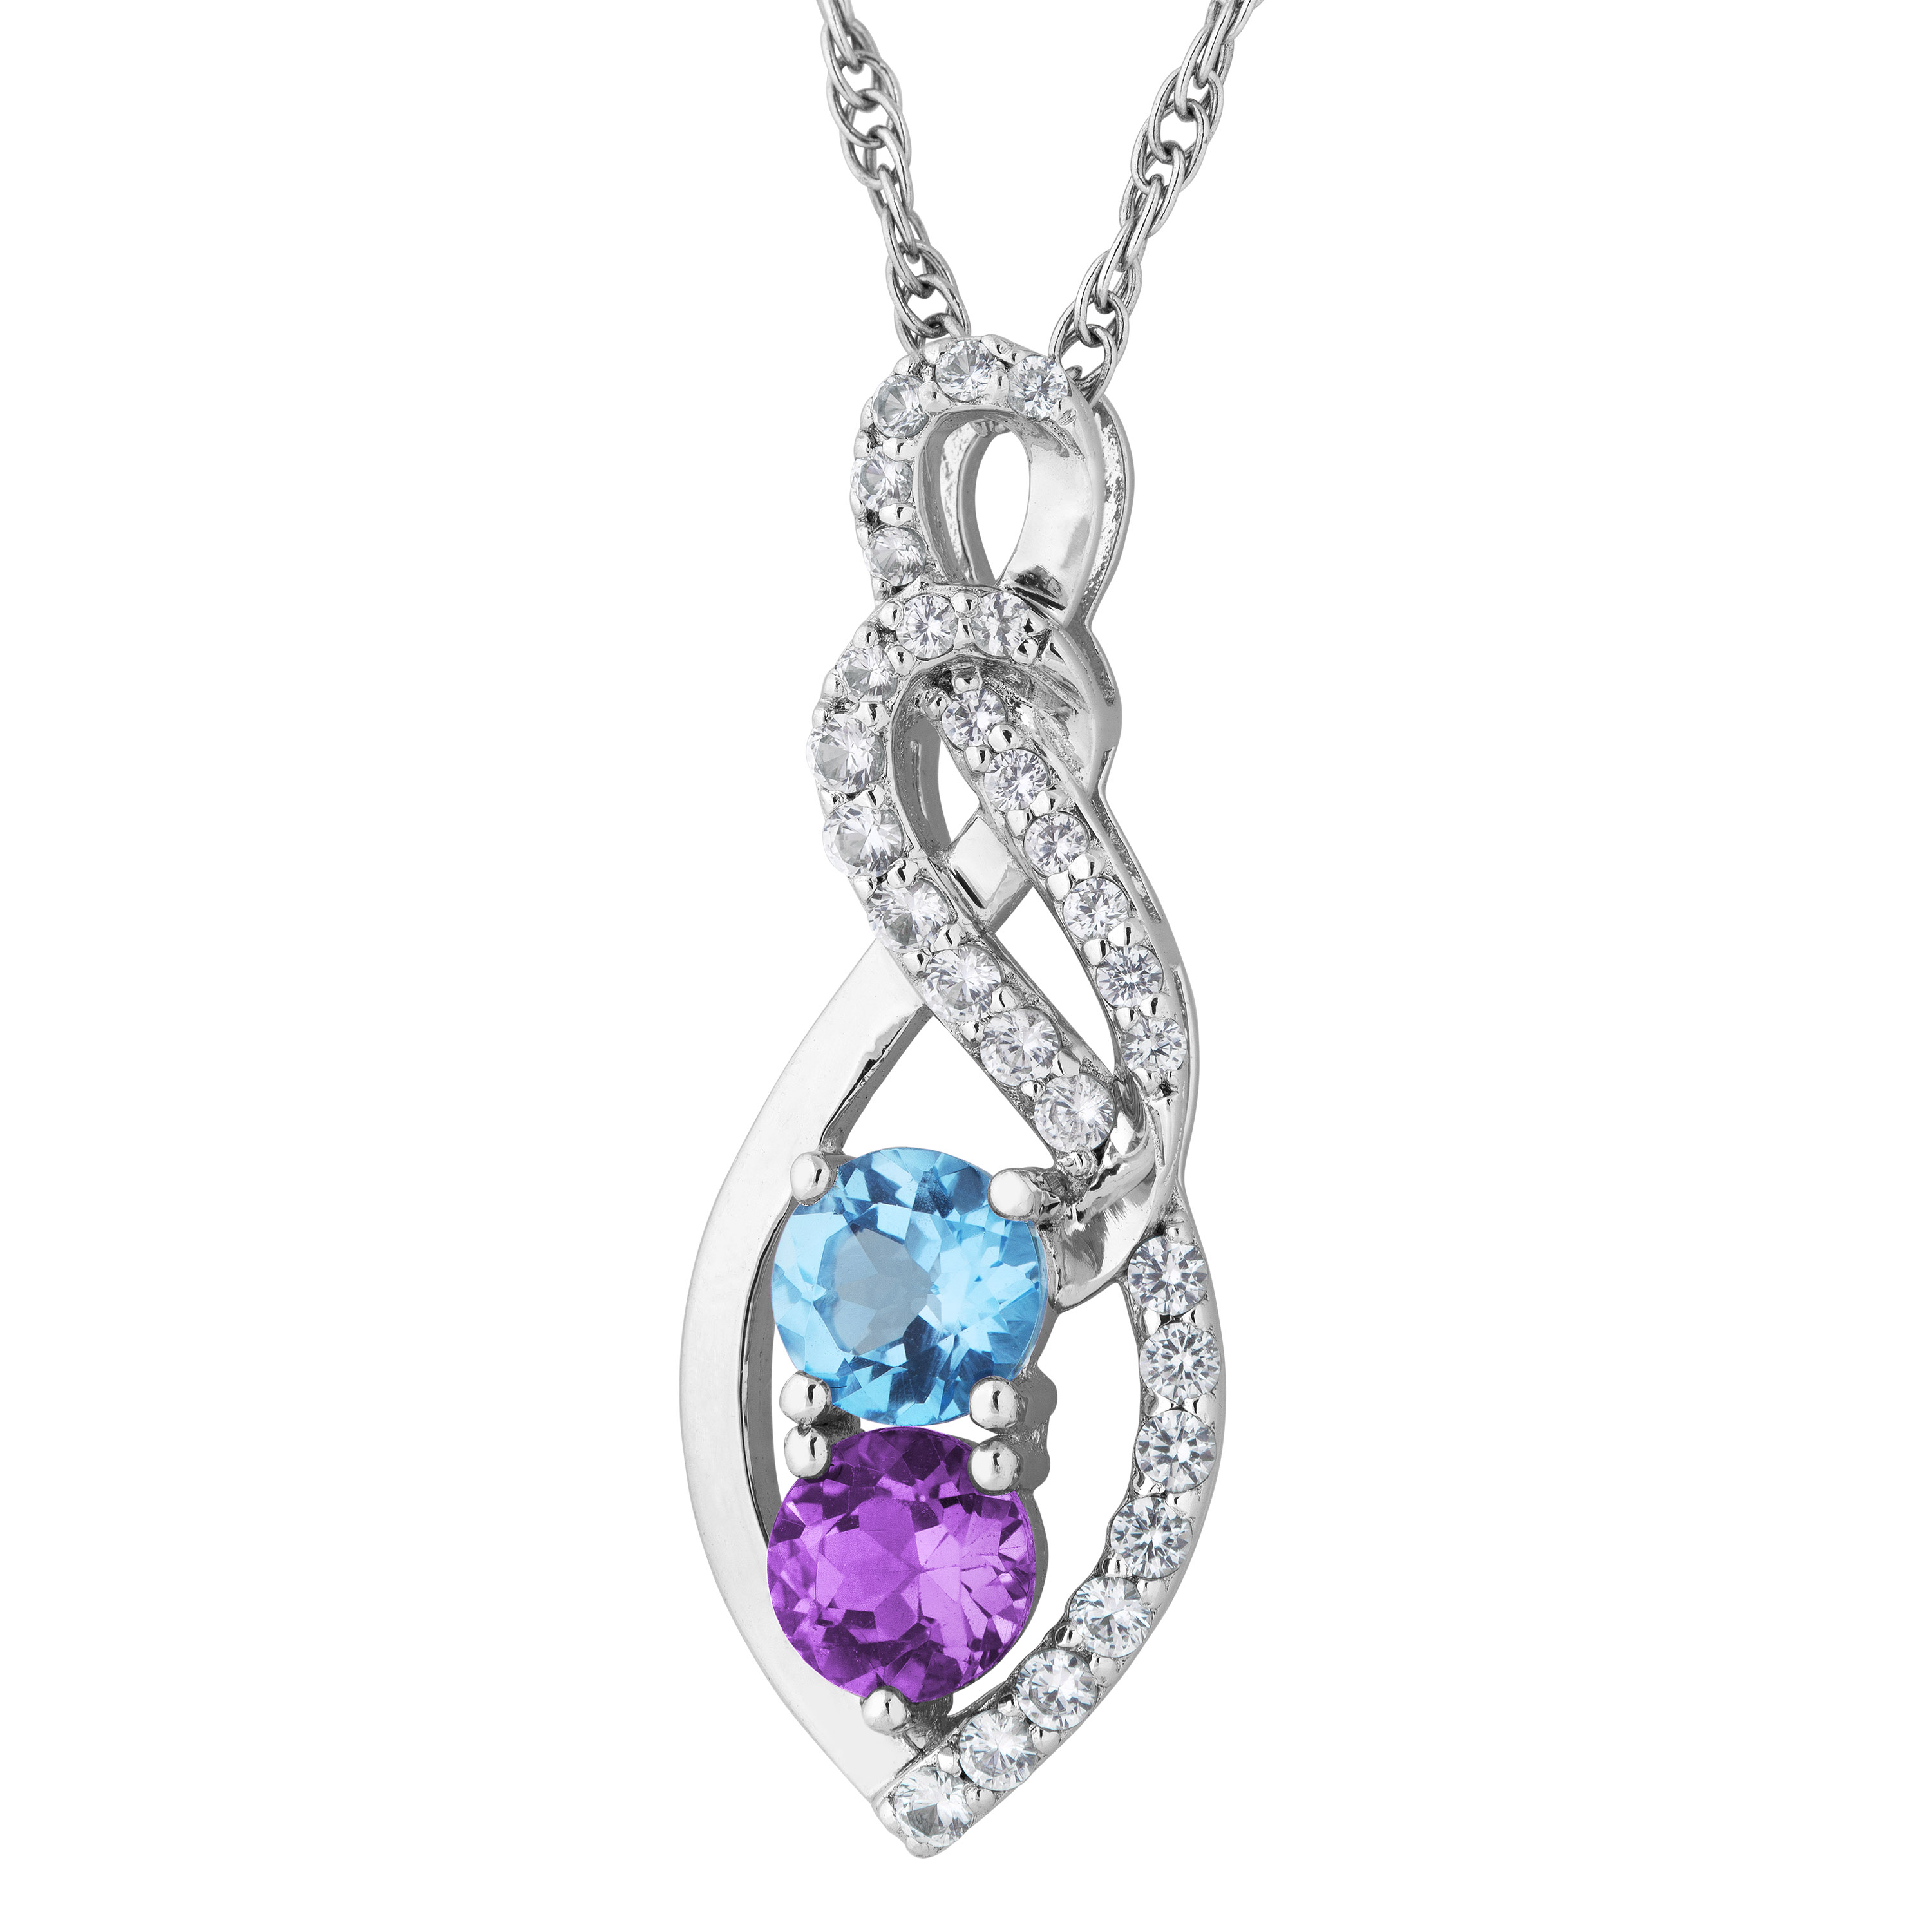 Swiss Blue Topaz and Brazillian Amethyst Pendant Necklace, Rhodium Plated Sterling Silver